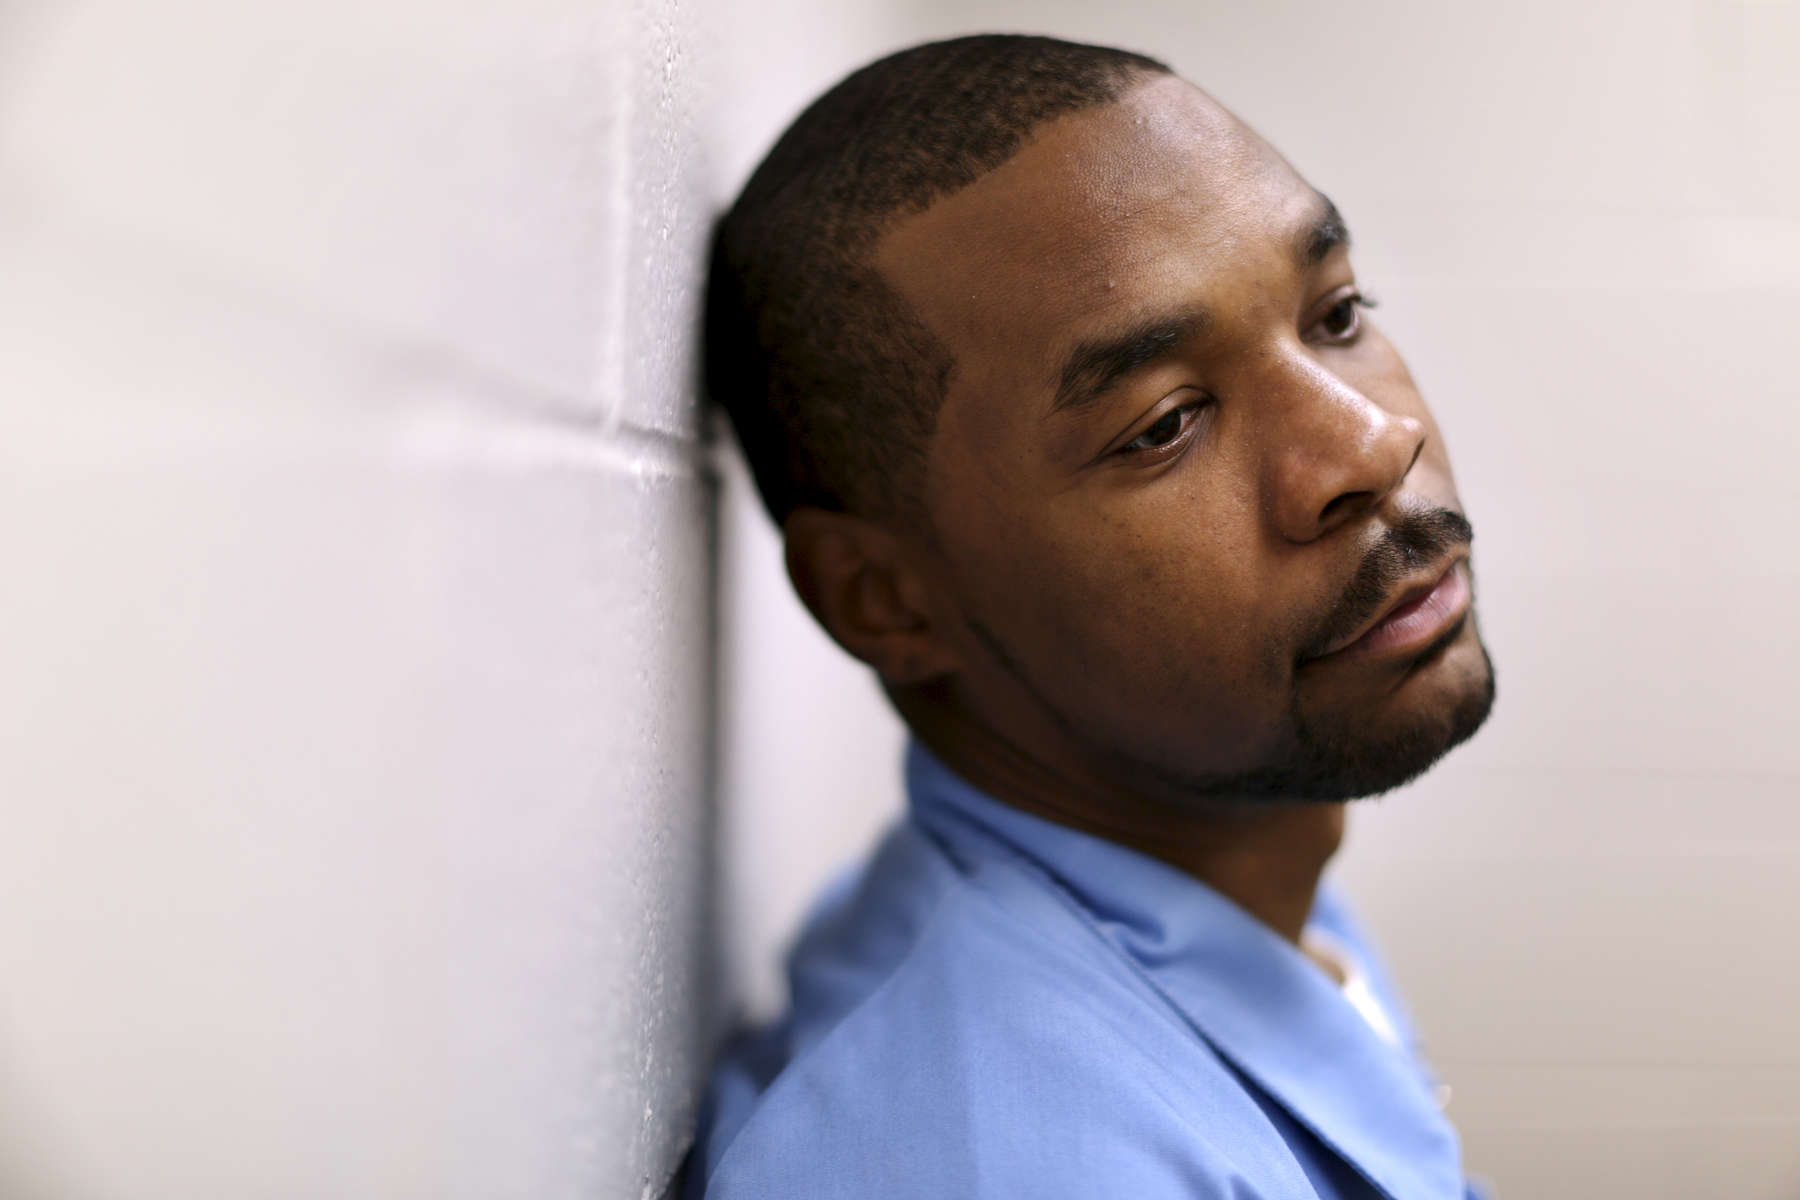 Darren Edmondson, who is incarcerated at the Robinson Correctional Center, stood for a portrait at the facility in Robinson, Ill. Edmondson was convicted of pimping 19-year-old Rock River Academy runaway Mary Bohanan at a Bloomington truck stop in November 2013.